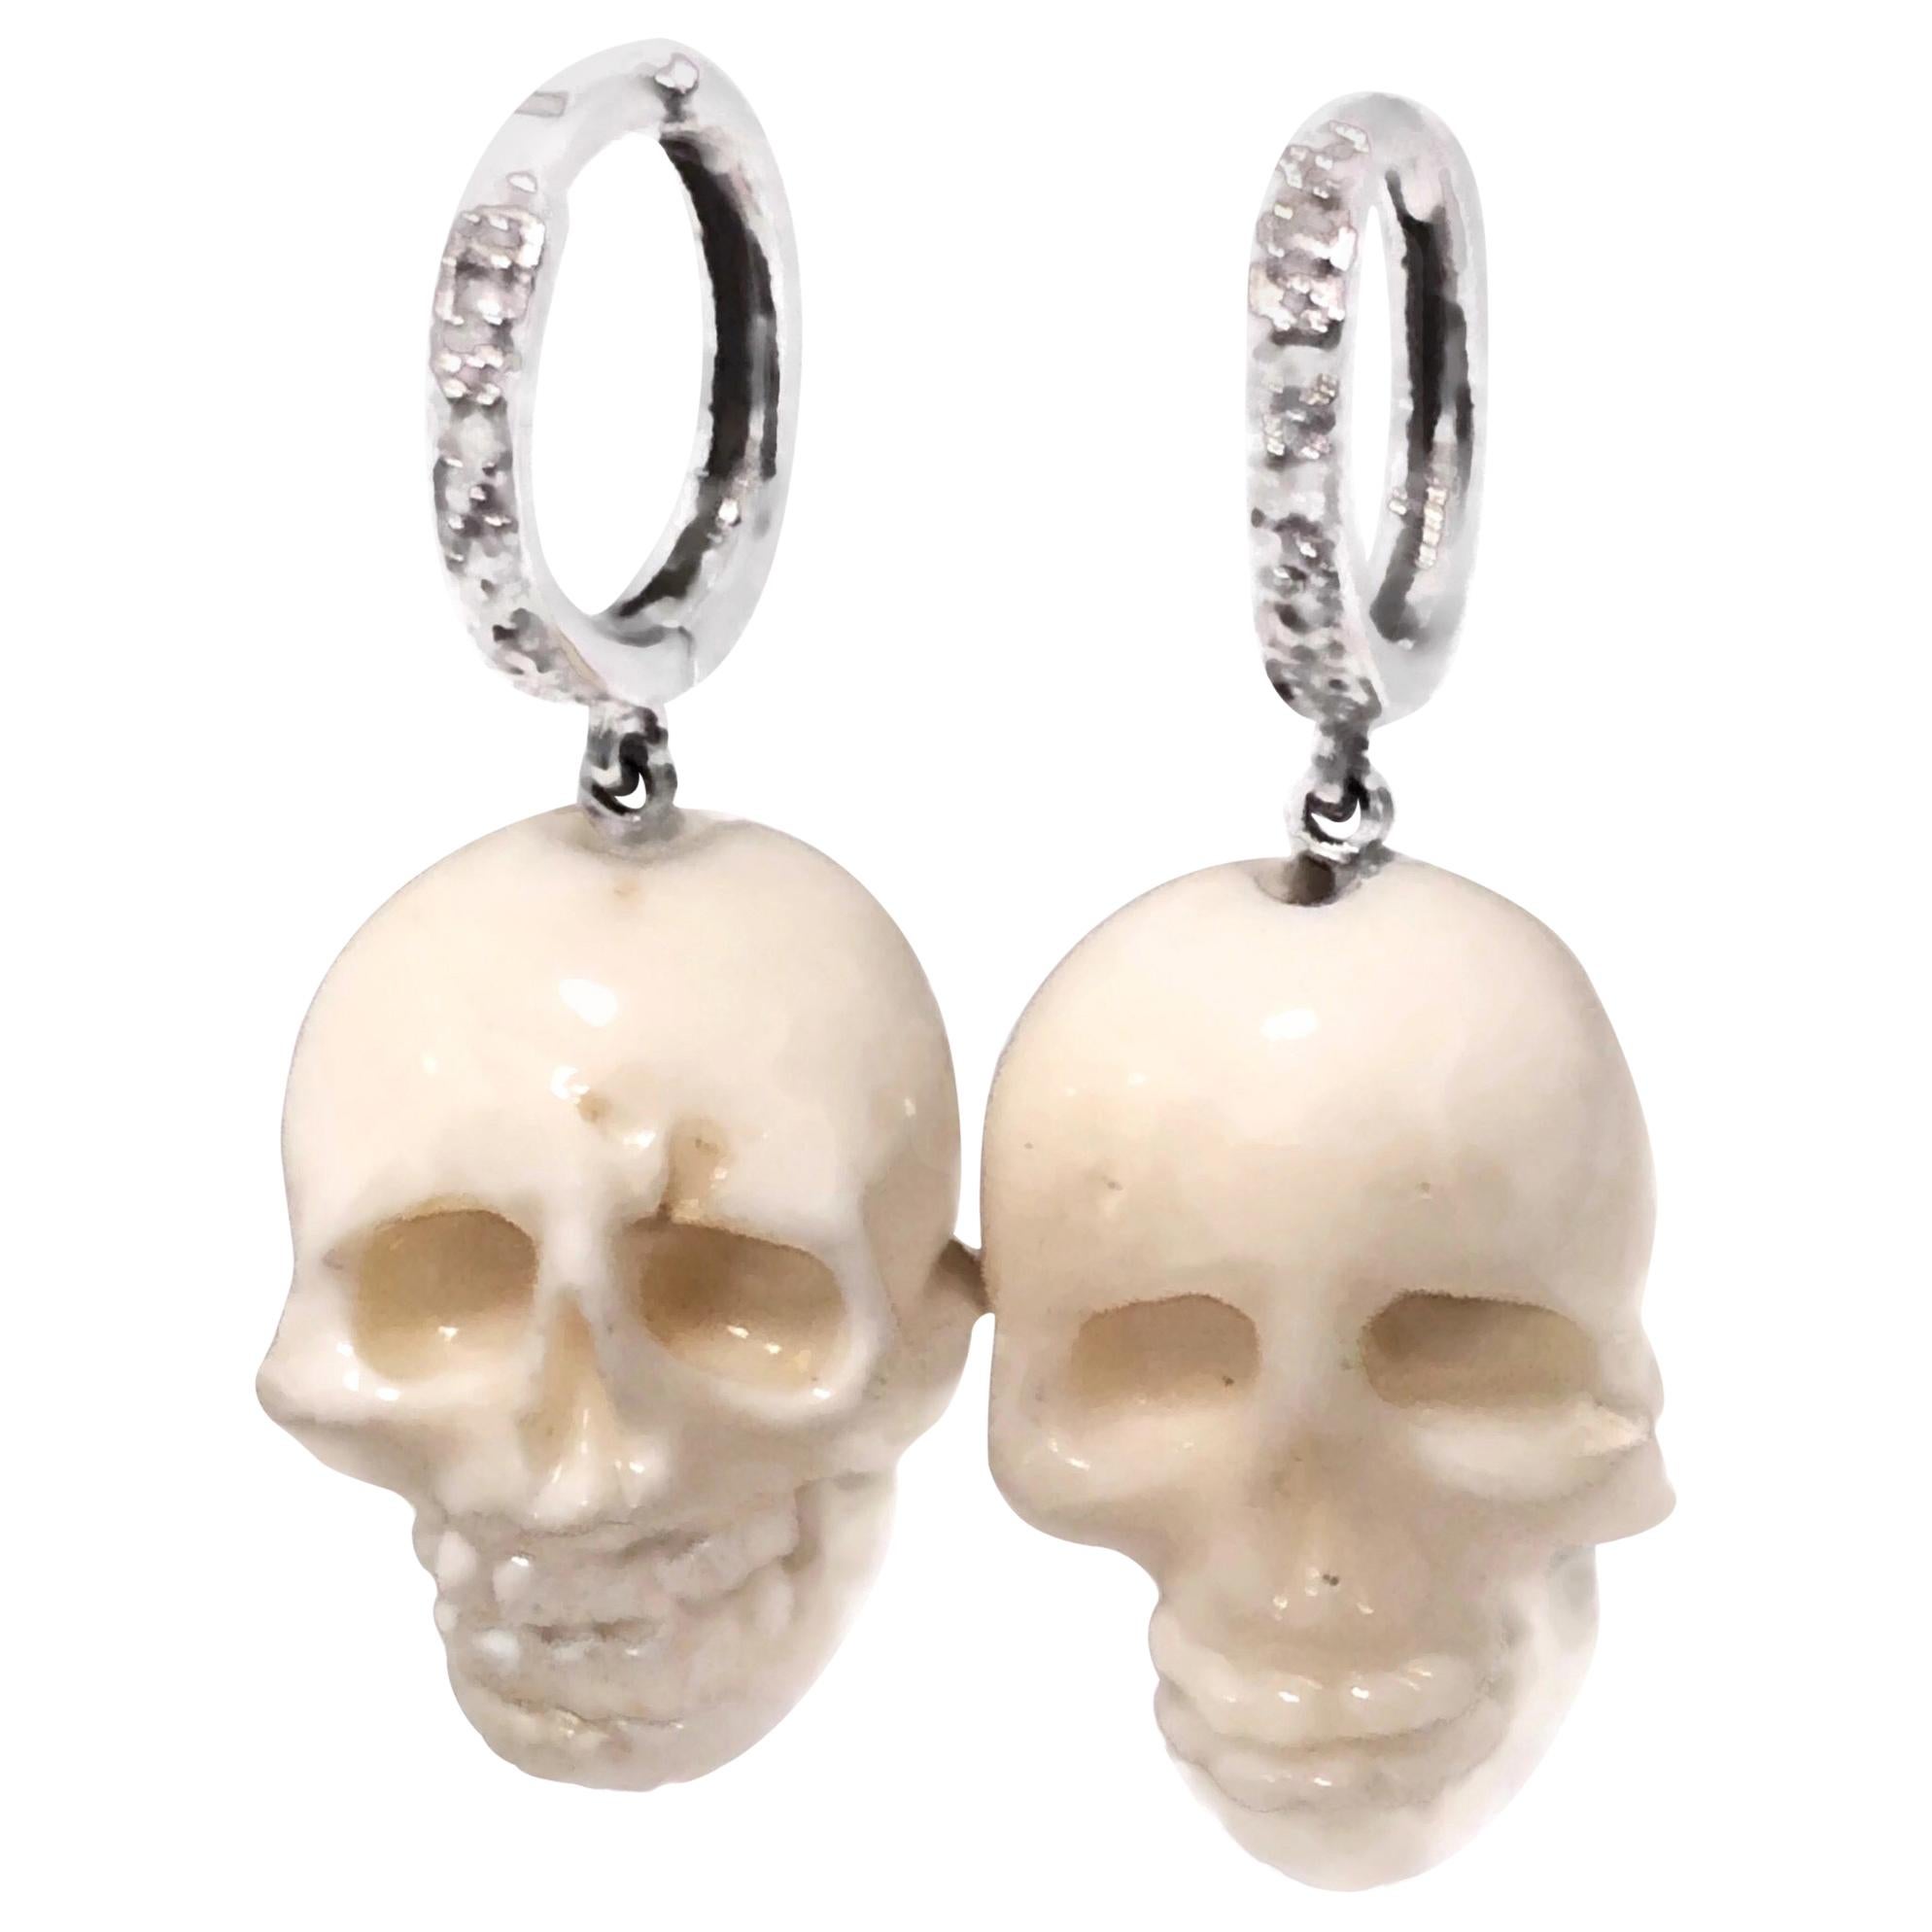 Hand Crafted Earrings Halloween Skulls and S/L Ruby Toho Beads size 1 1/2" Long/ 